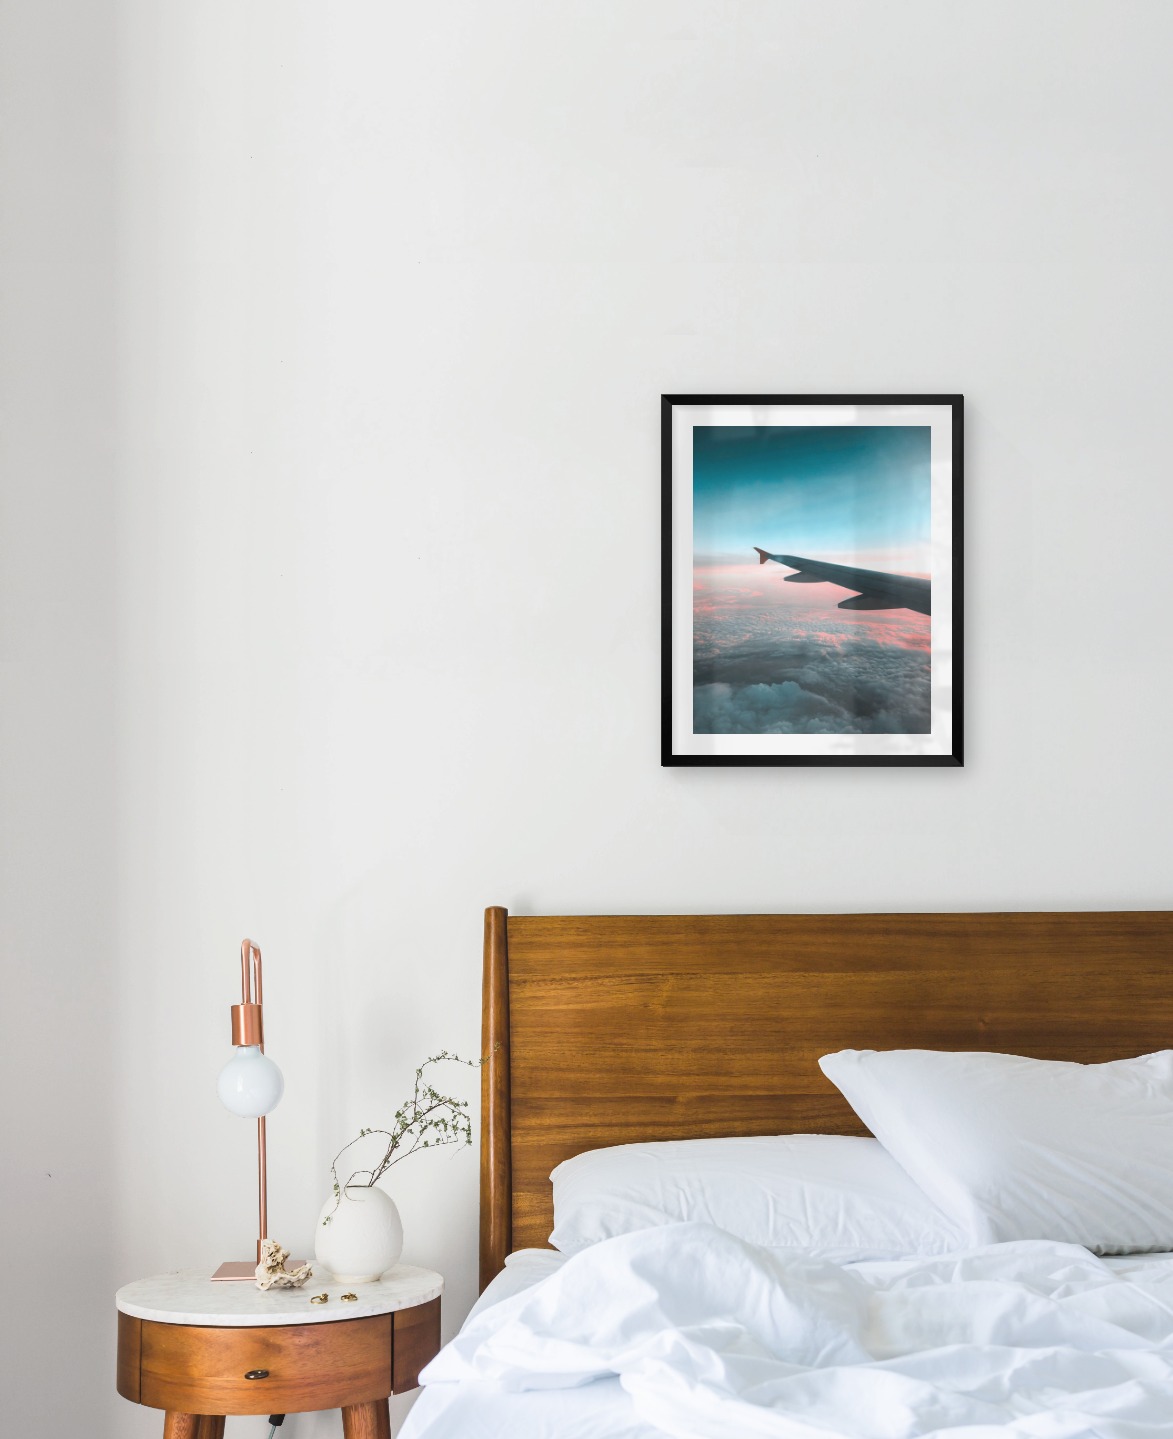 Gallery wall with picture frame in black in size 40x50 with print "Above the clouds"